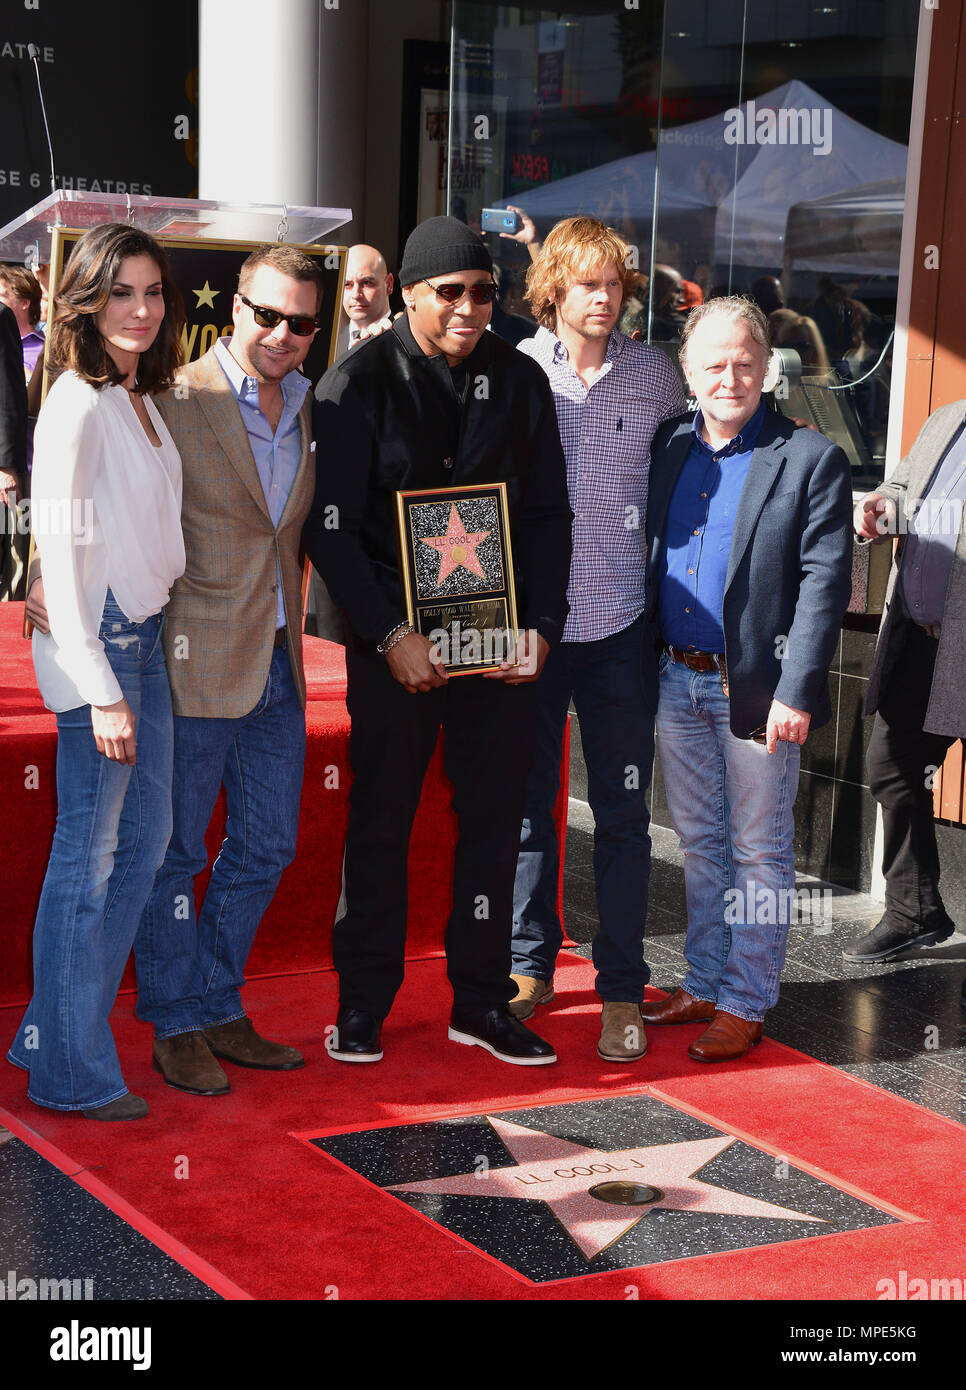 LL Cool J Star 019 cast of NCIS- Los Angeles  at LL Cool Honored with a Star on the Hollywood Walk Of fame in Los Angeles. January 21, 2016.LL Cool J Star 019 cast of NCIS- Los Angeles   Event in Hollywood Life - California, Red Carpet Event, USA, Film Industry, Celebrities, Photography, Bestof, Arts Culture and Entertainment, Topix Celebrities fashion, Best of, Hollywood Life, Event in Hollywood Life - California, Red Carpet and backstage, movie celebrities, TV celebrities, Music celebrities, Arts Culture and Entertainment, vertical, one person, Photography,    inquiry tsuni@Gamma-USA.com , C Stock Photo